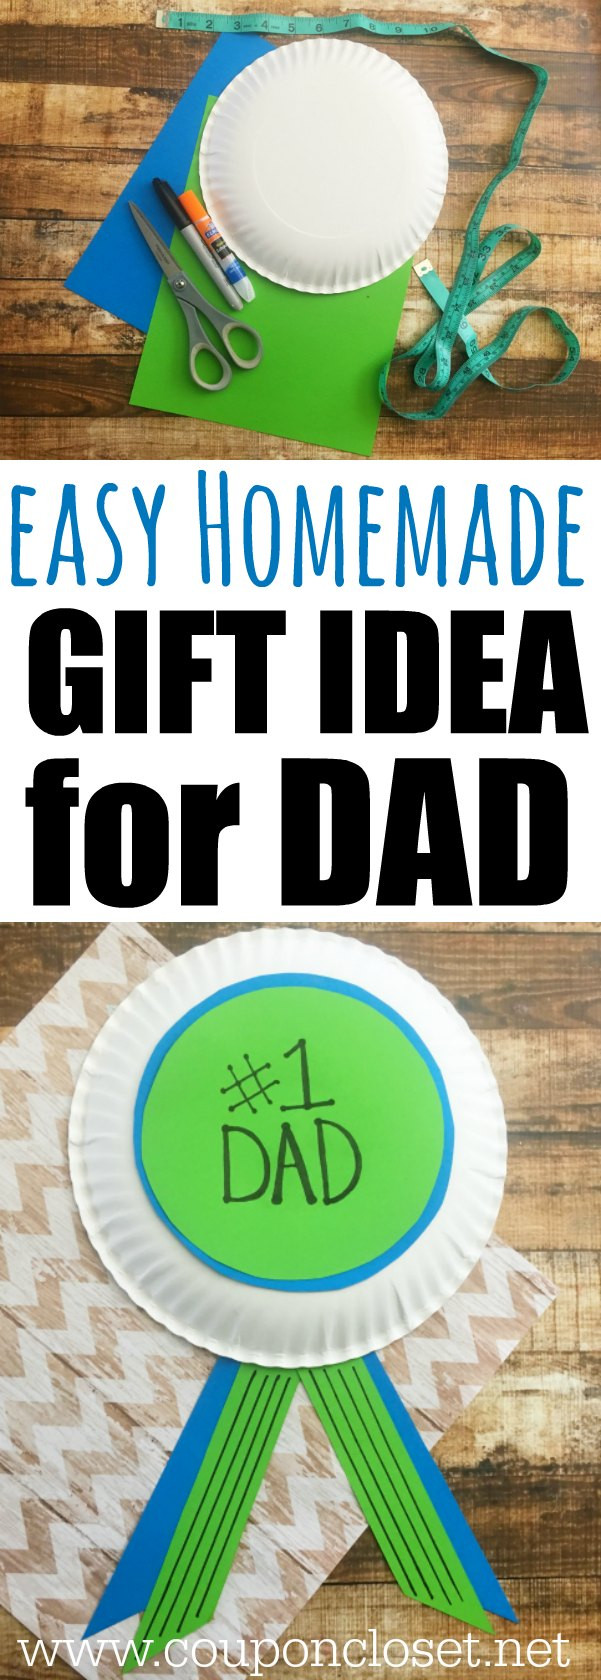 Gift Ideas For Dad From Kids
 Homemade Father s Day Gift Idea 1 Dad Award e Crazy Mom